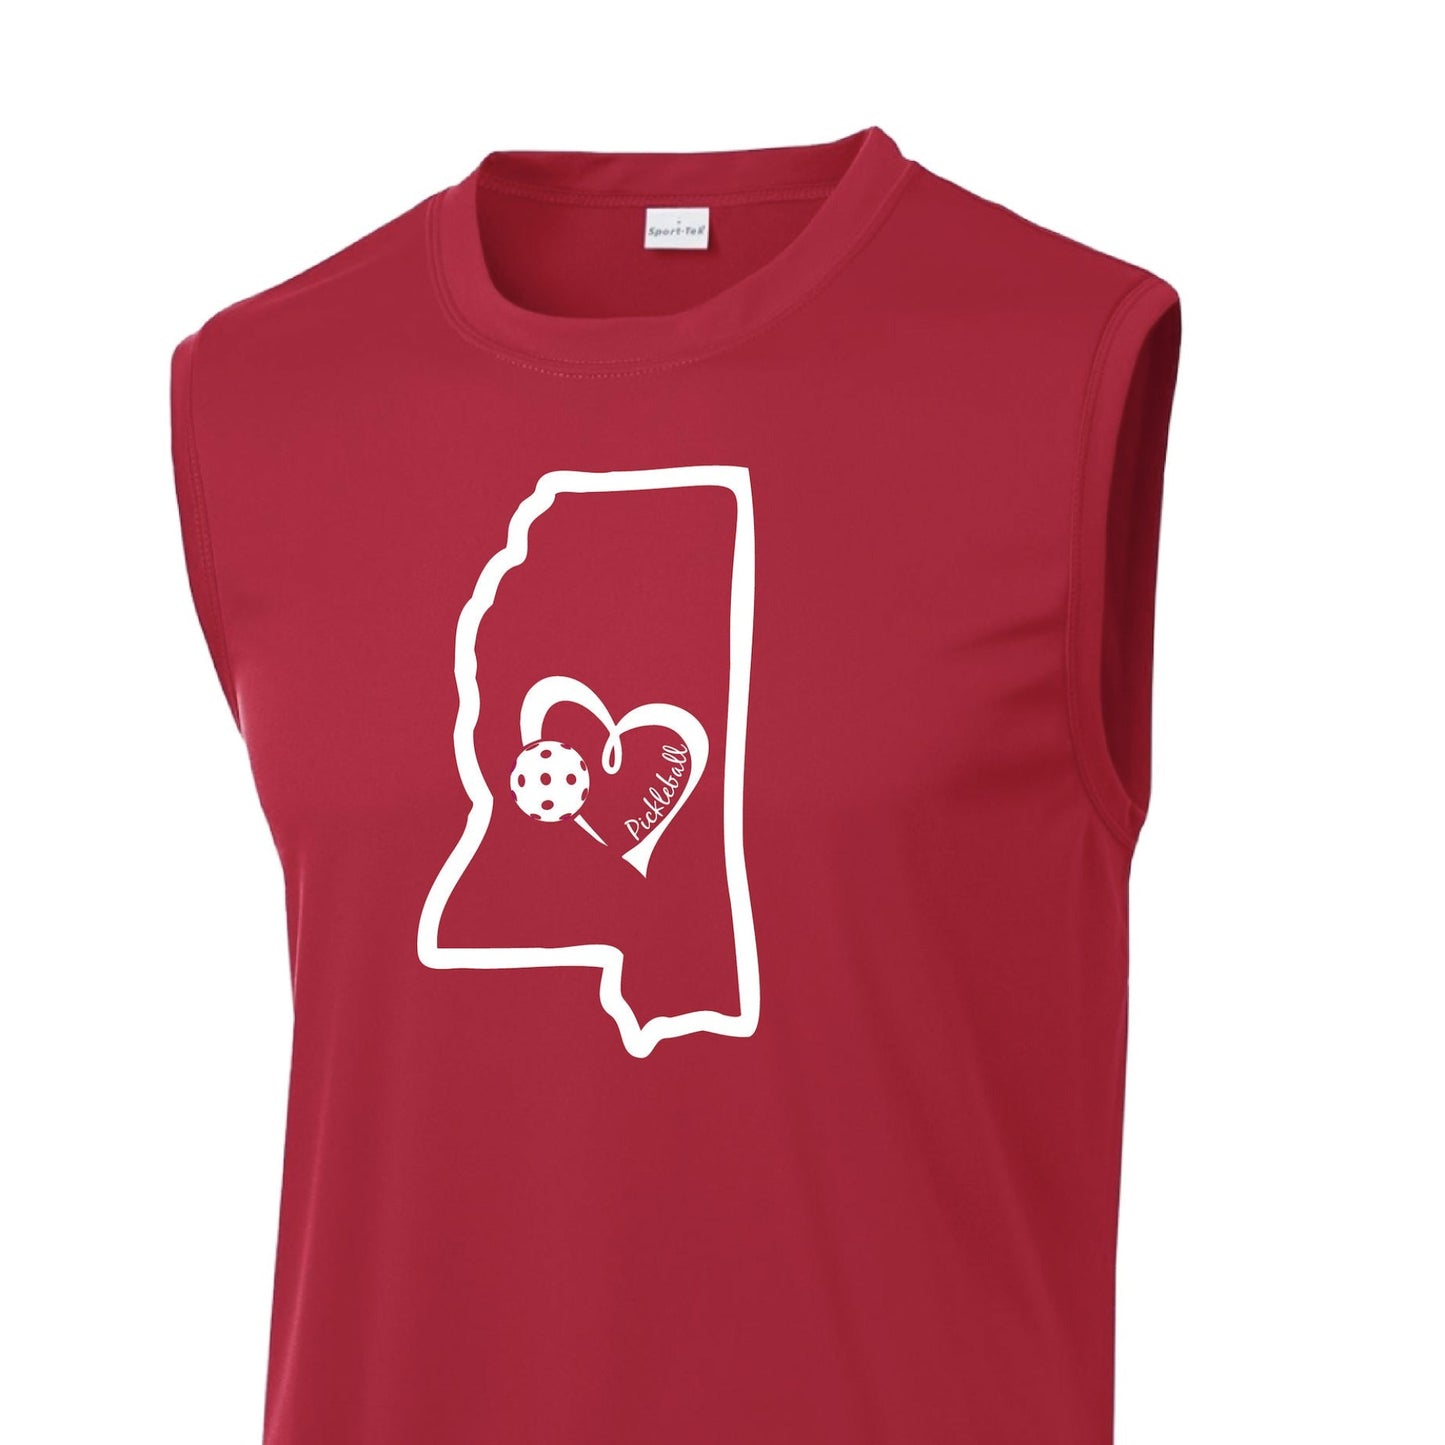 Pickleball Design: Mississippi State with Heart  Men's Styles: Sleeveless  Shirts are lightweight, roomy and highly breathable. These moisture-wicking shirts are designed for athletic performance. They feature PosiCharge technology to lock in color and prevent logos from fading. Removable tag and set-in sleeves for comfort.